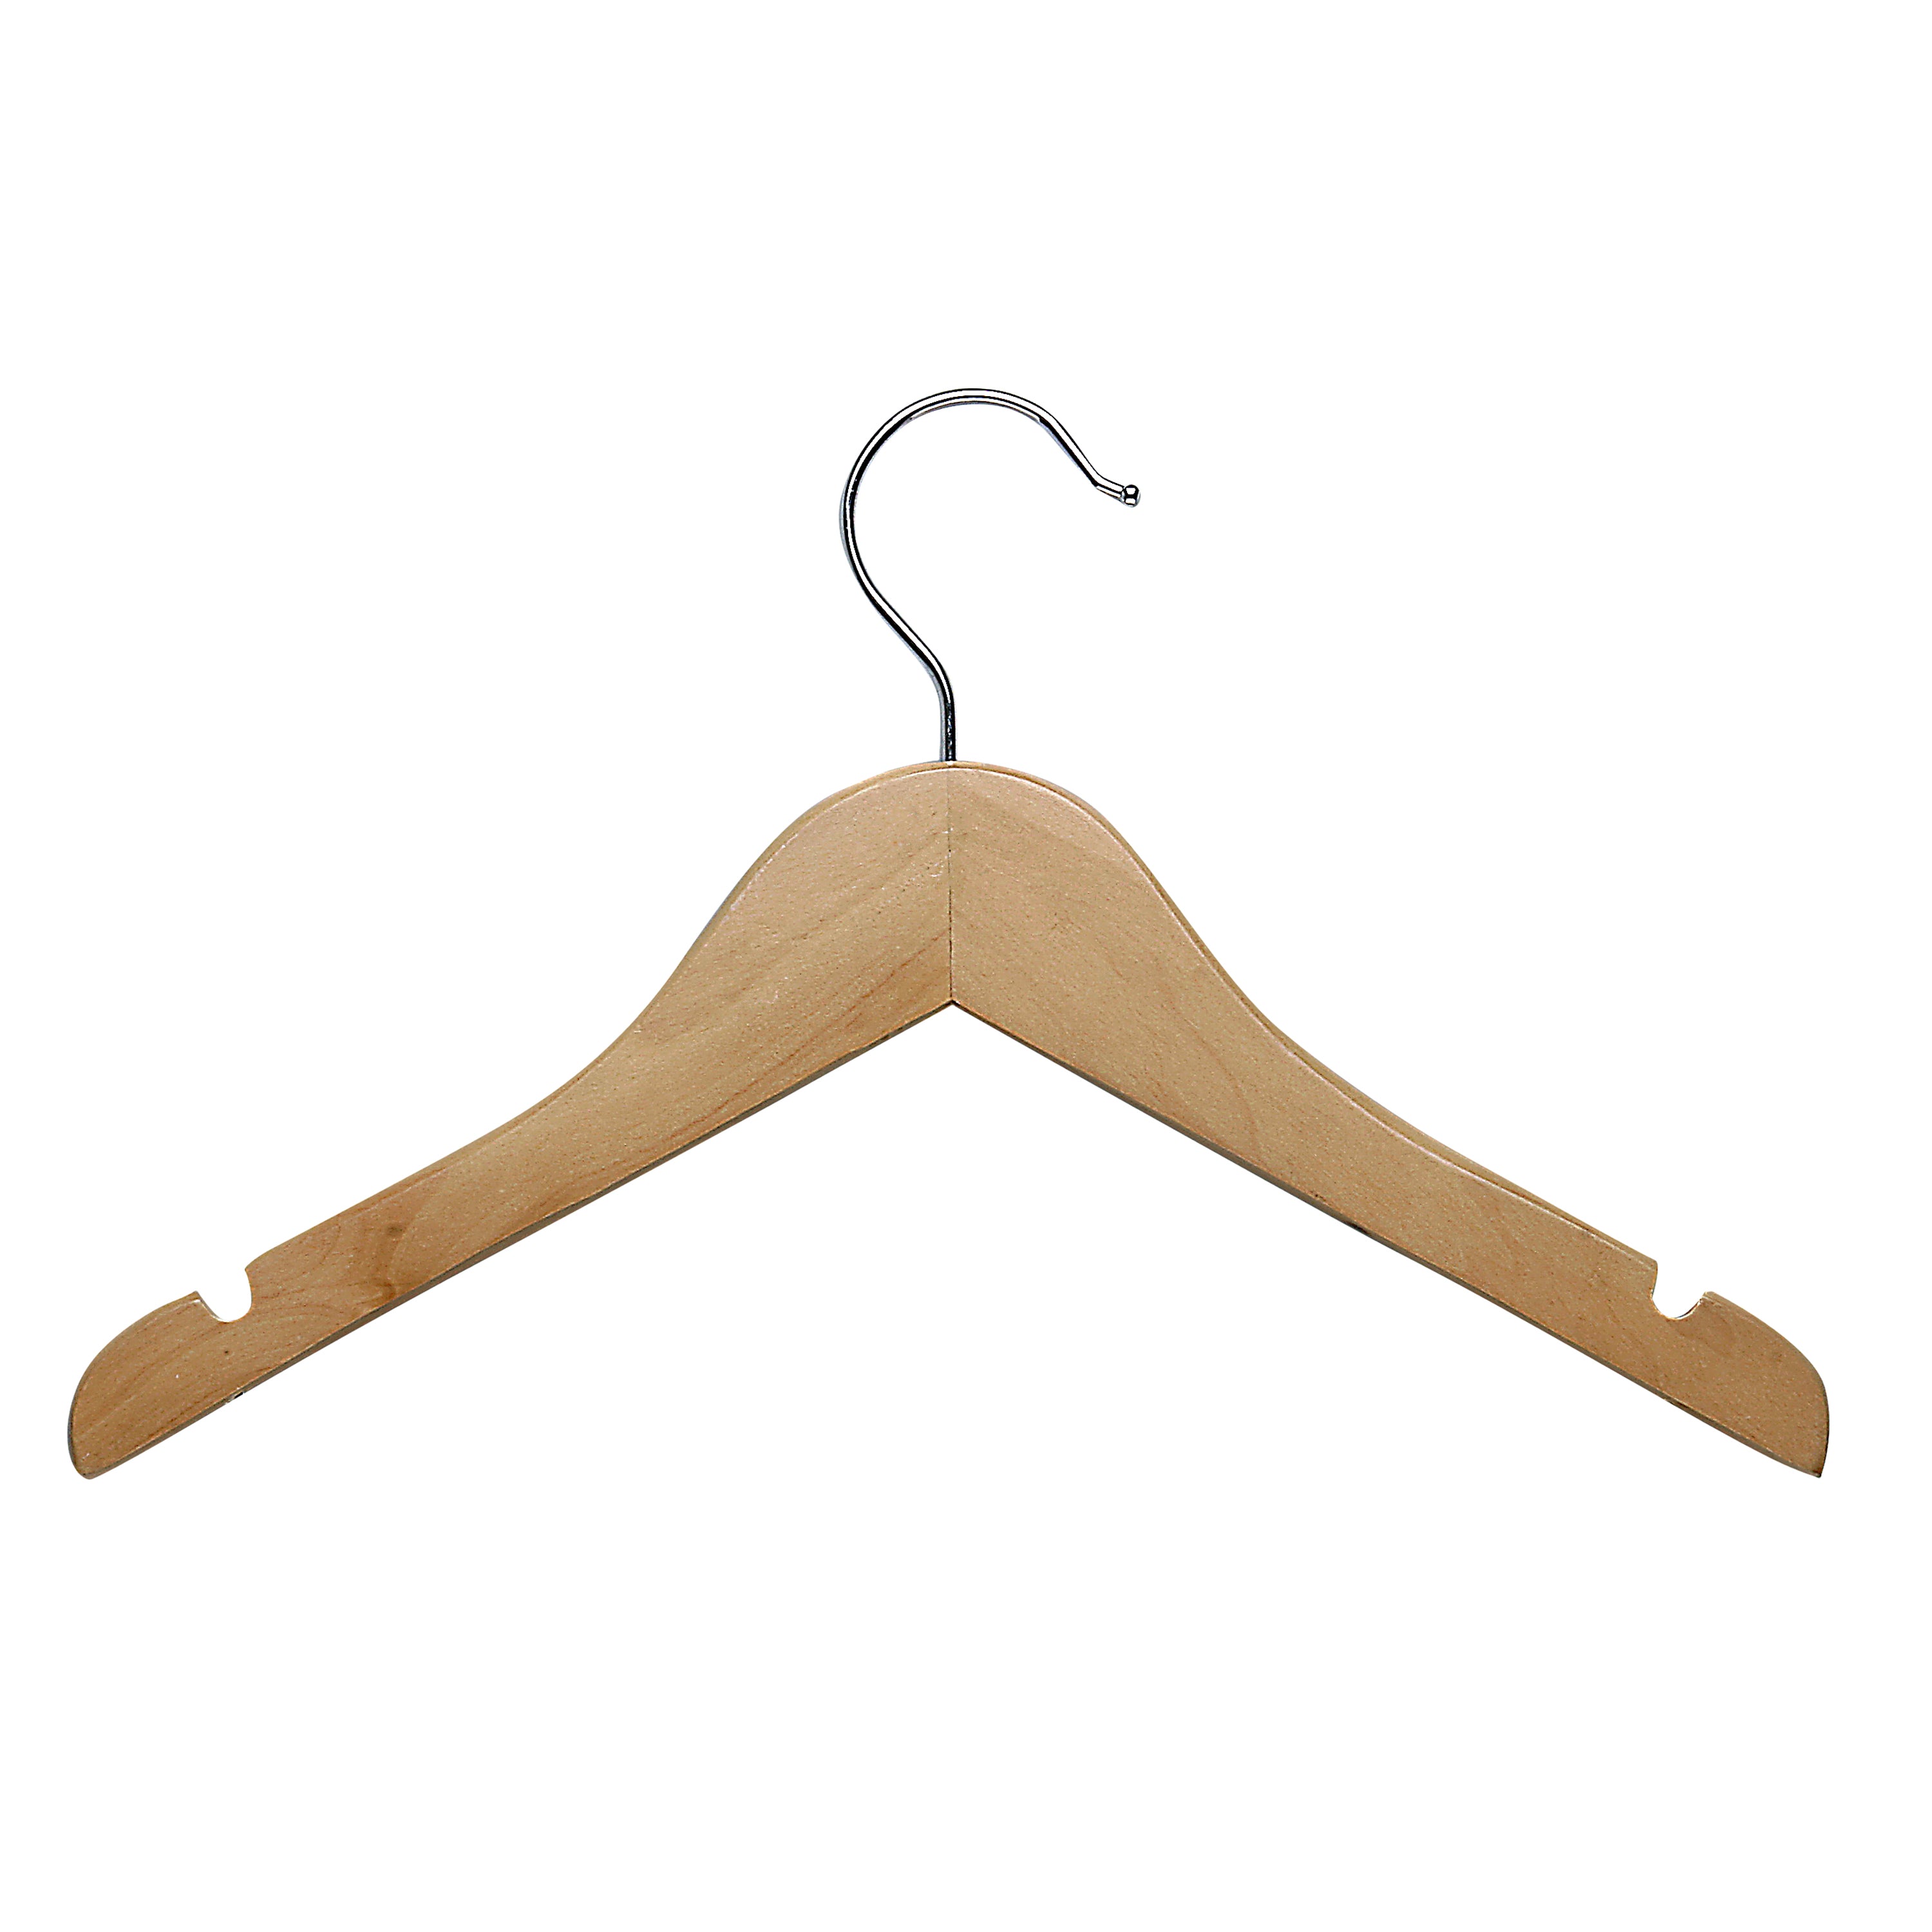 Honey Can Do Pink Slim Profile Rubber Kids Hangers, 10ct.